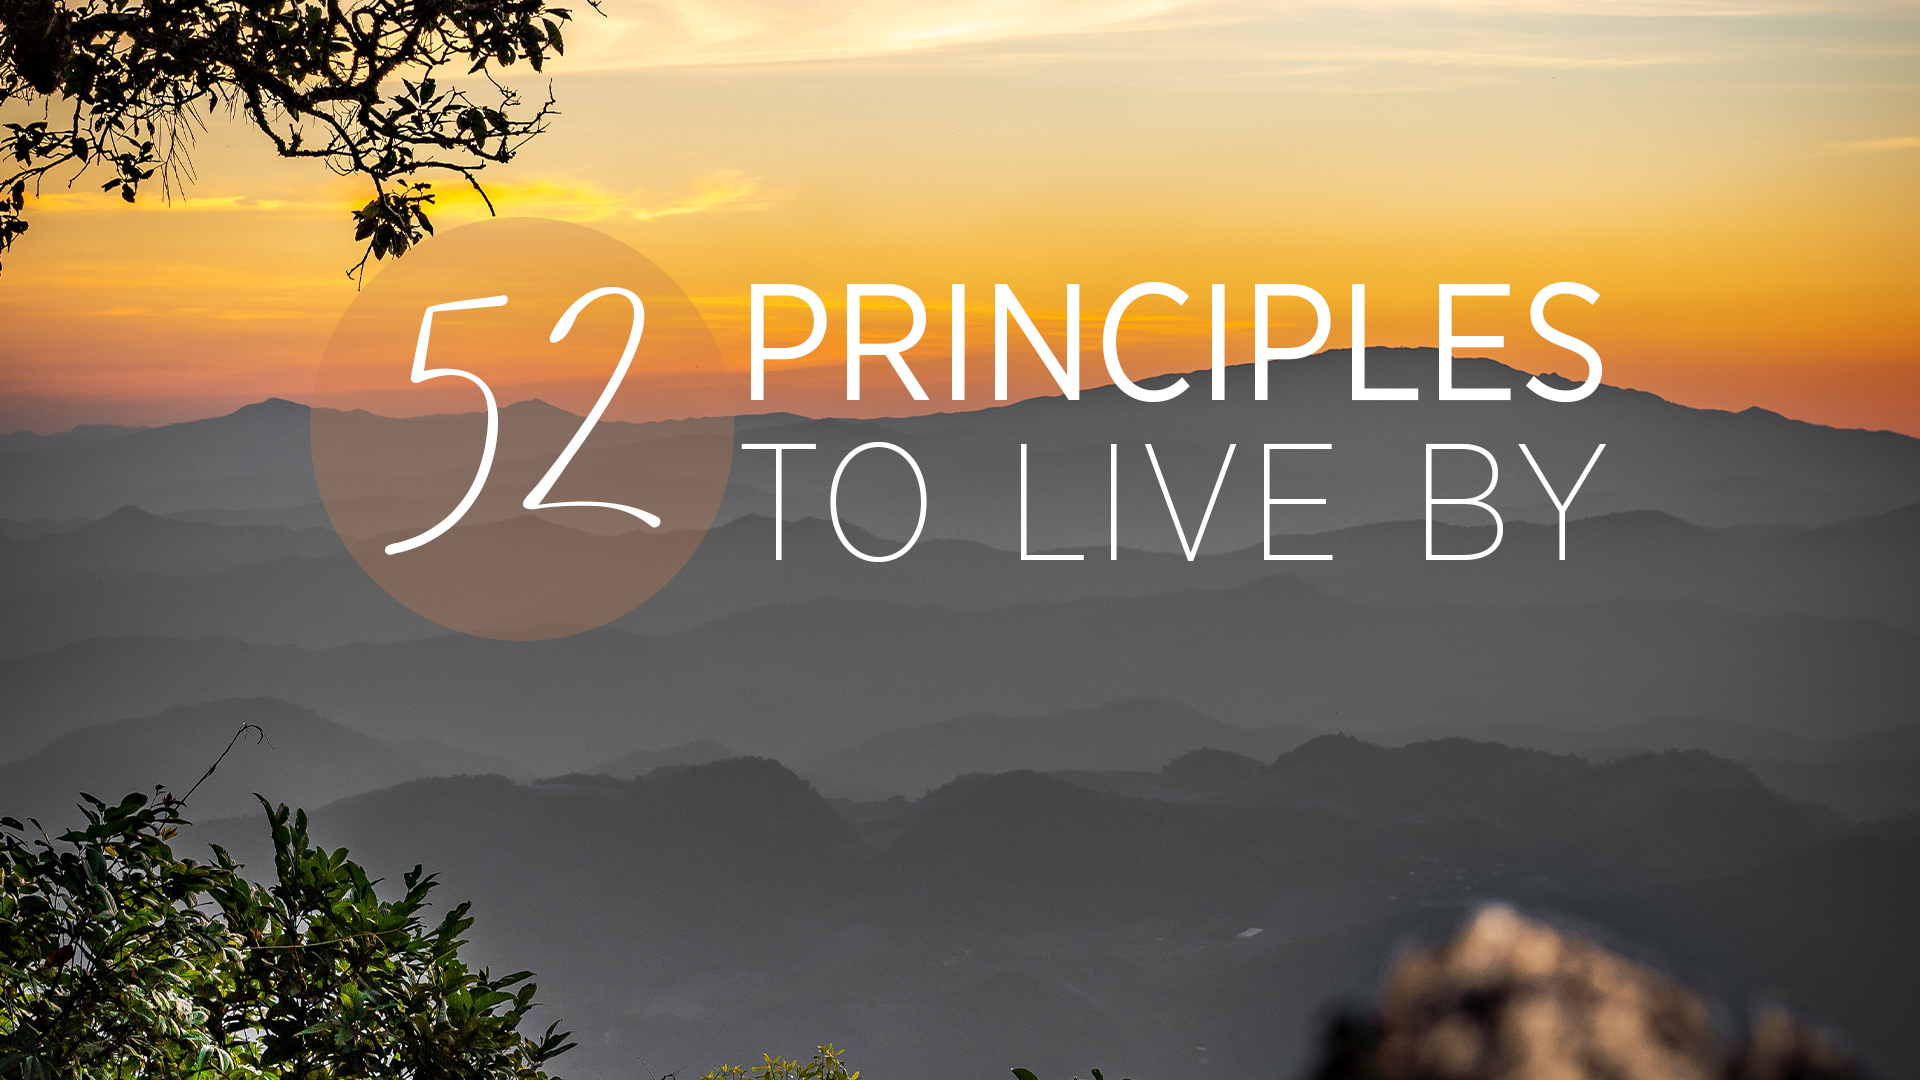 2020 Blog | 52 Principles to Live By